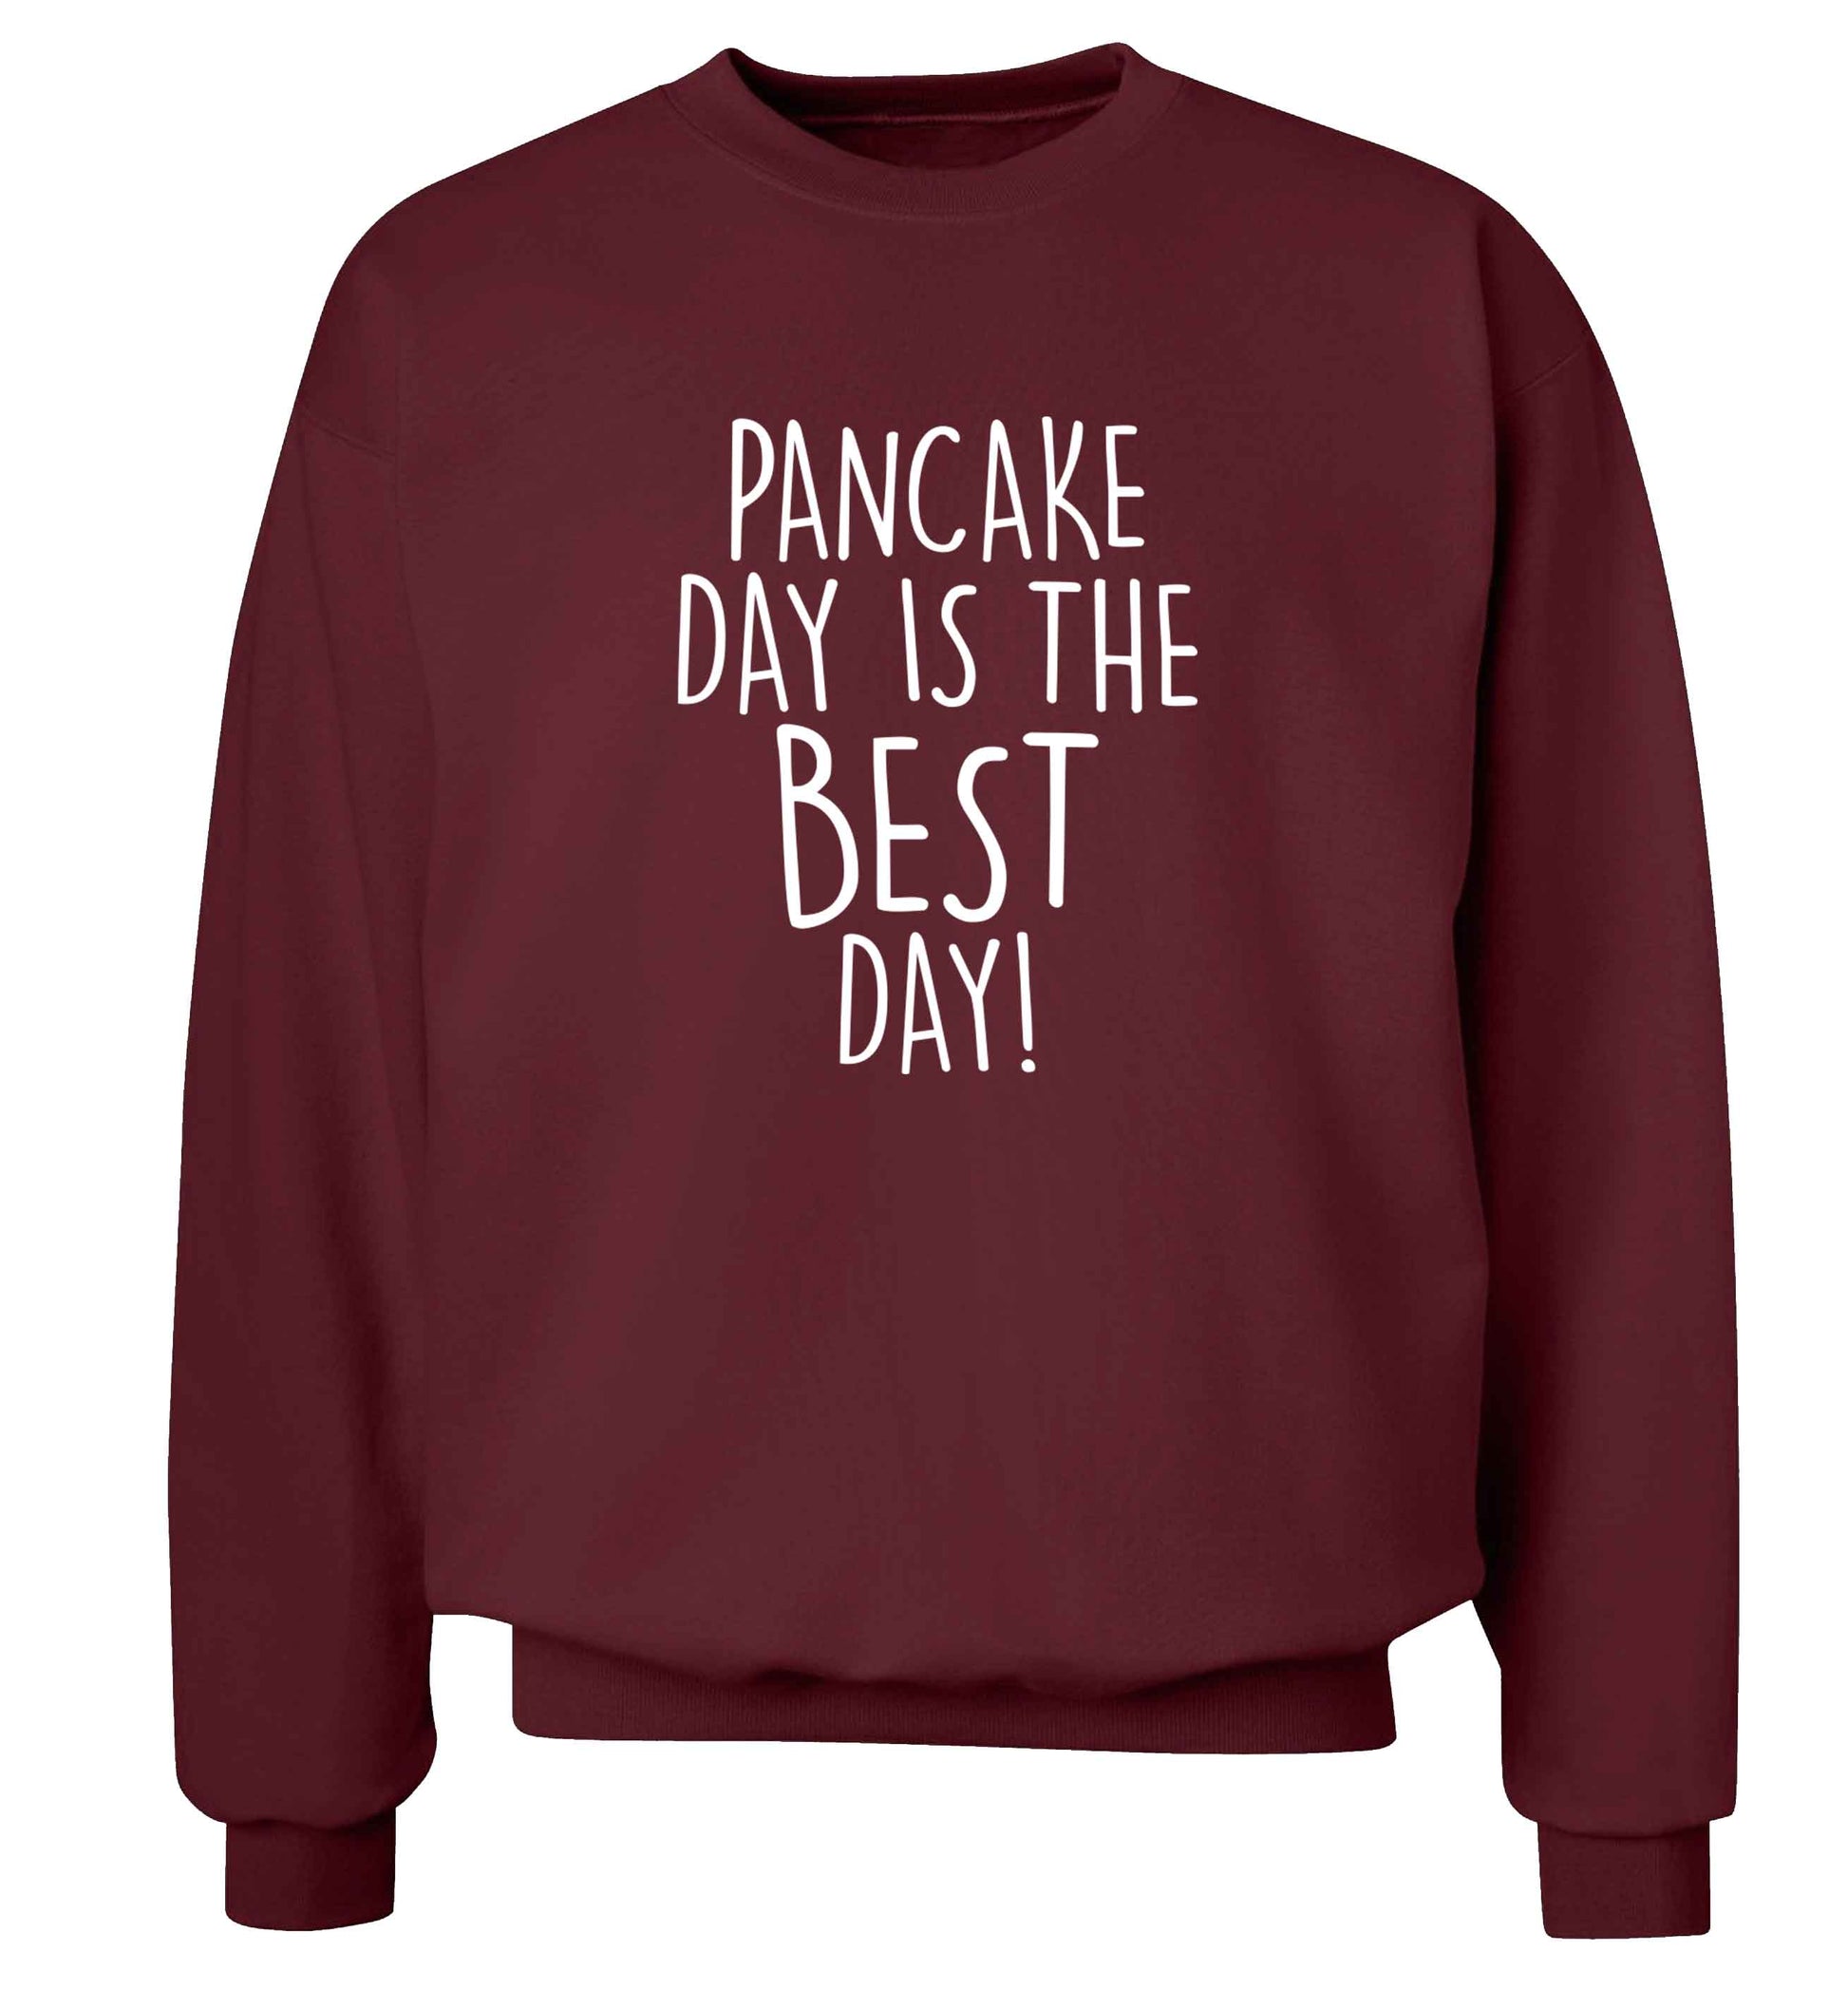 Pancake day is the best day adult's unisex maroon sweater 2XL